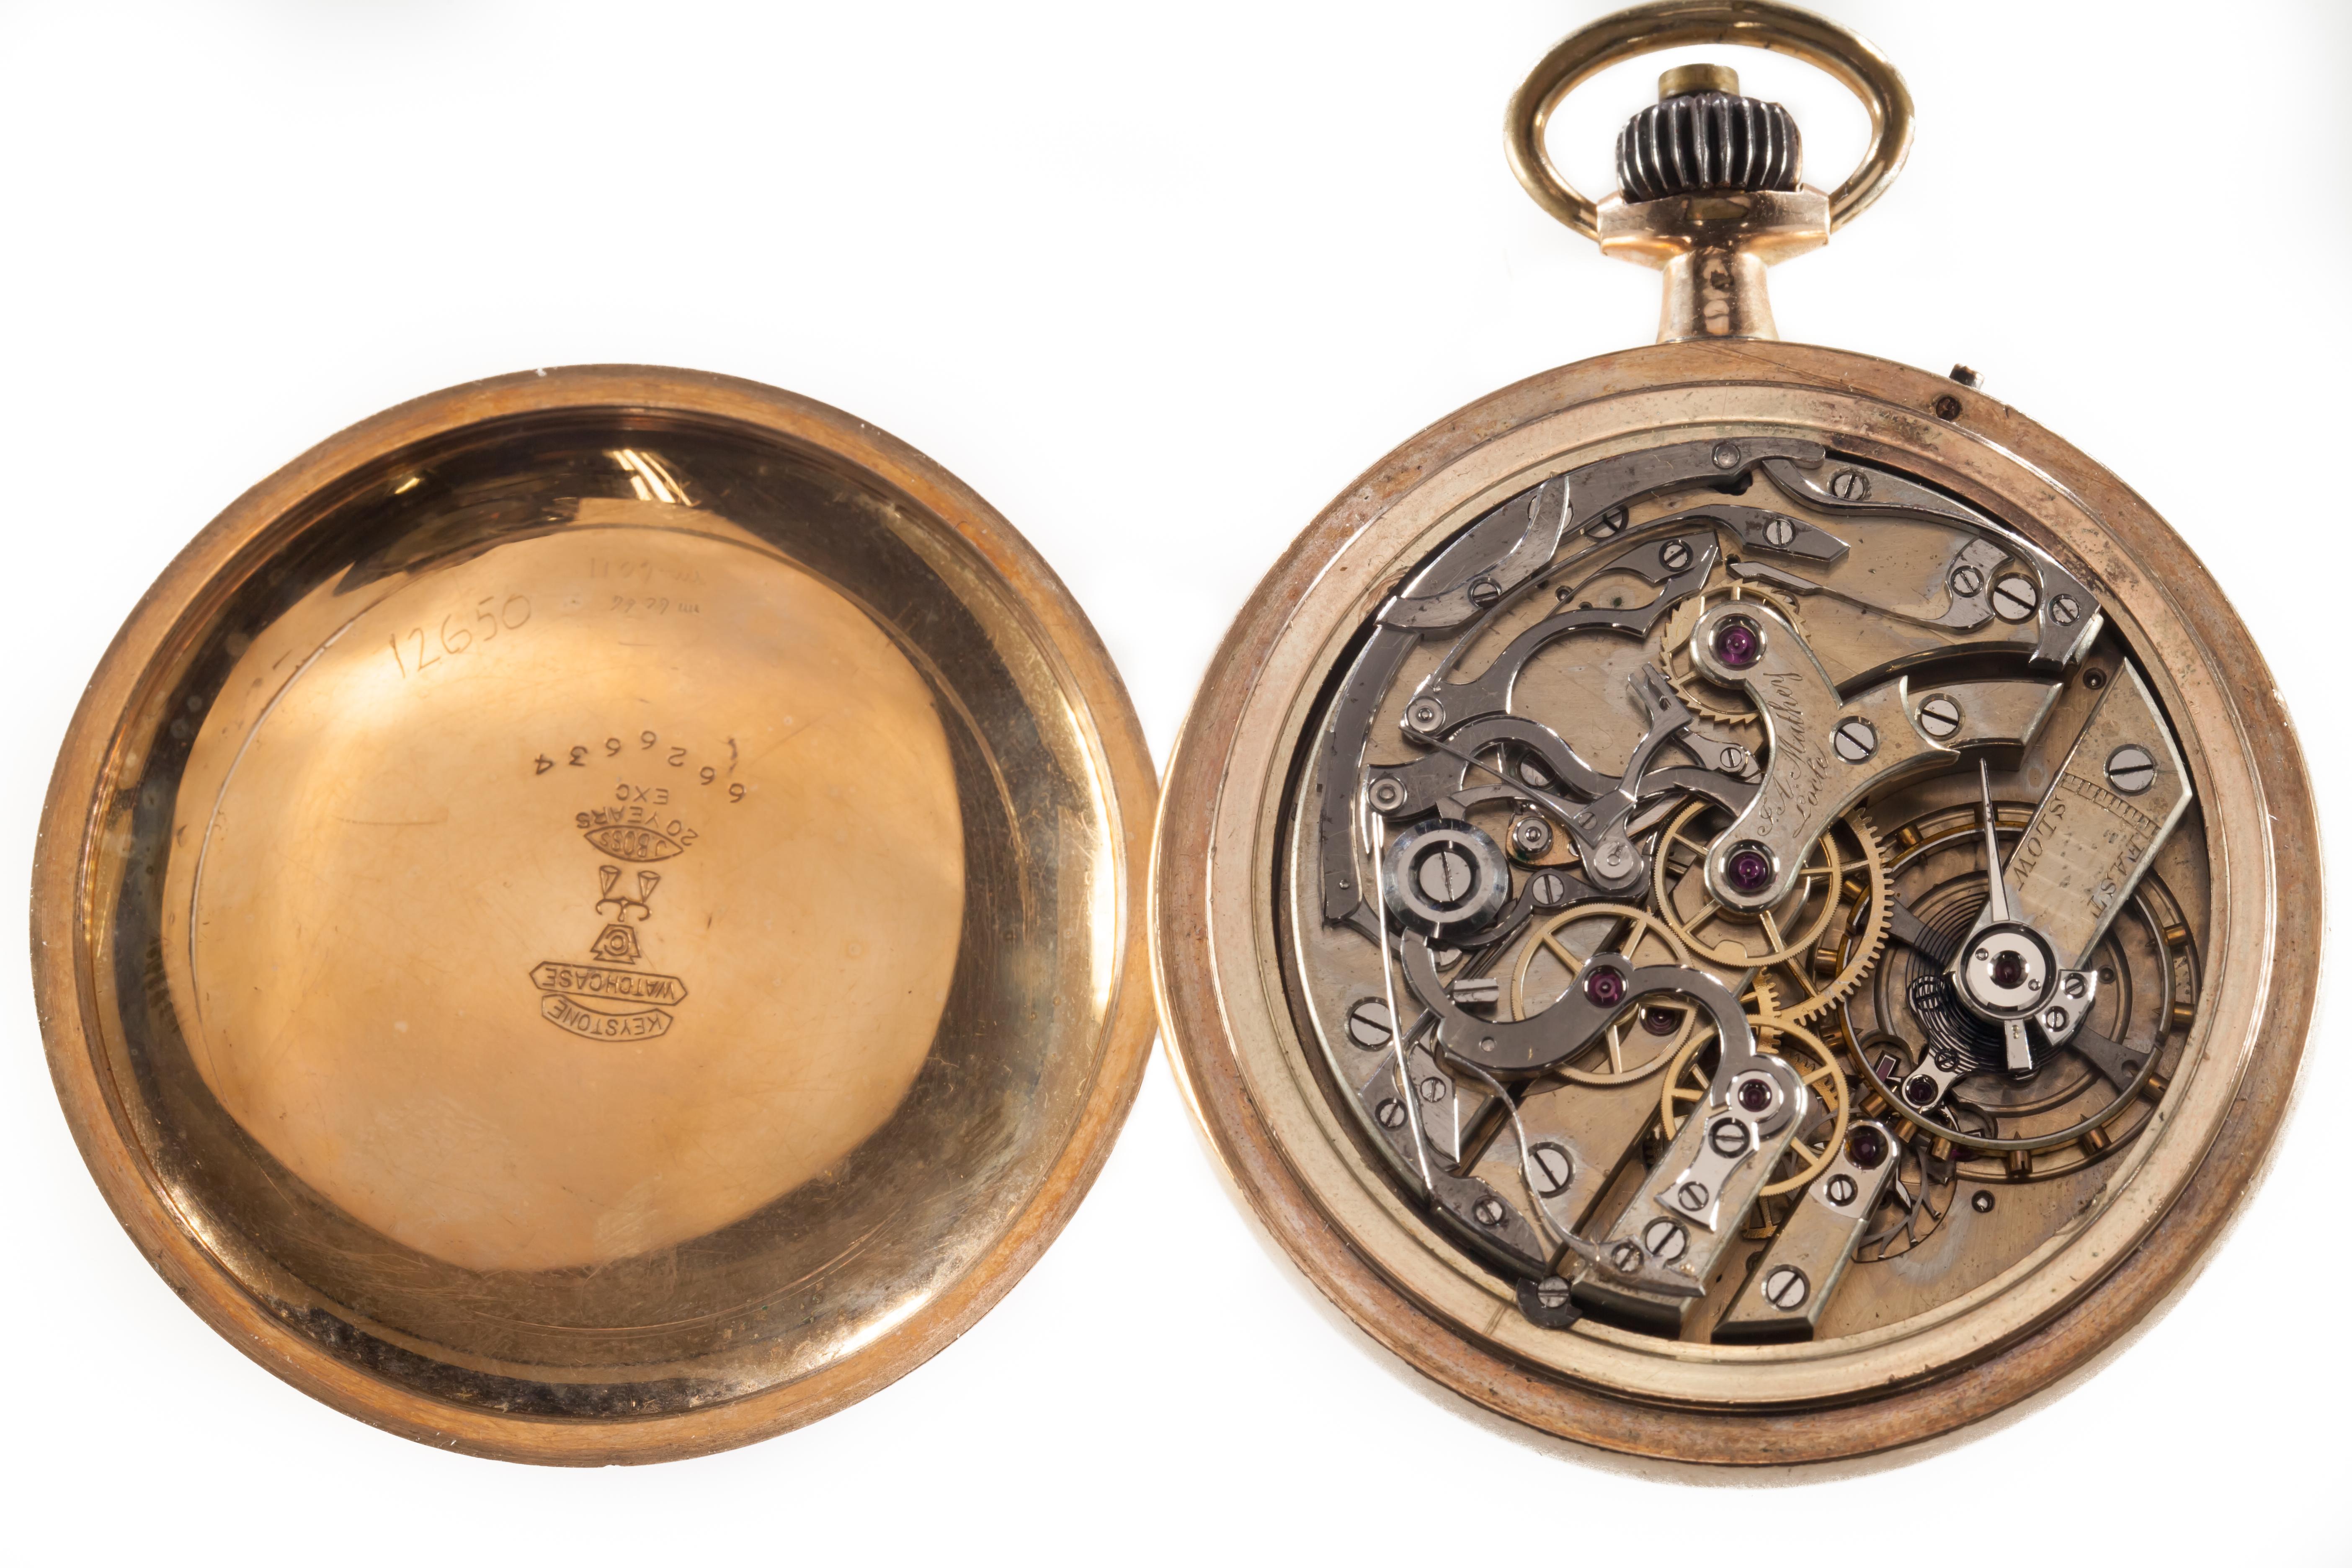 Rare Jules Mathey Locle Split Second Chronograph Pocket Watch

Beautifully Crafted Pocket Watch by Jules Mathey Locle & Keystone (Case)
Double sunk sub dials, Black numerals with Blue numbers above 
Keystone Case, Gold Filled by James Boss Serial